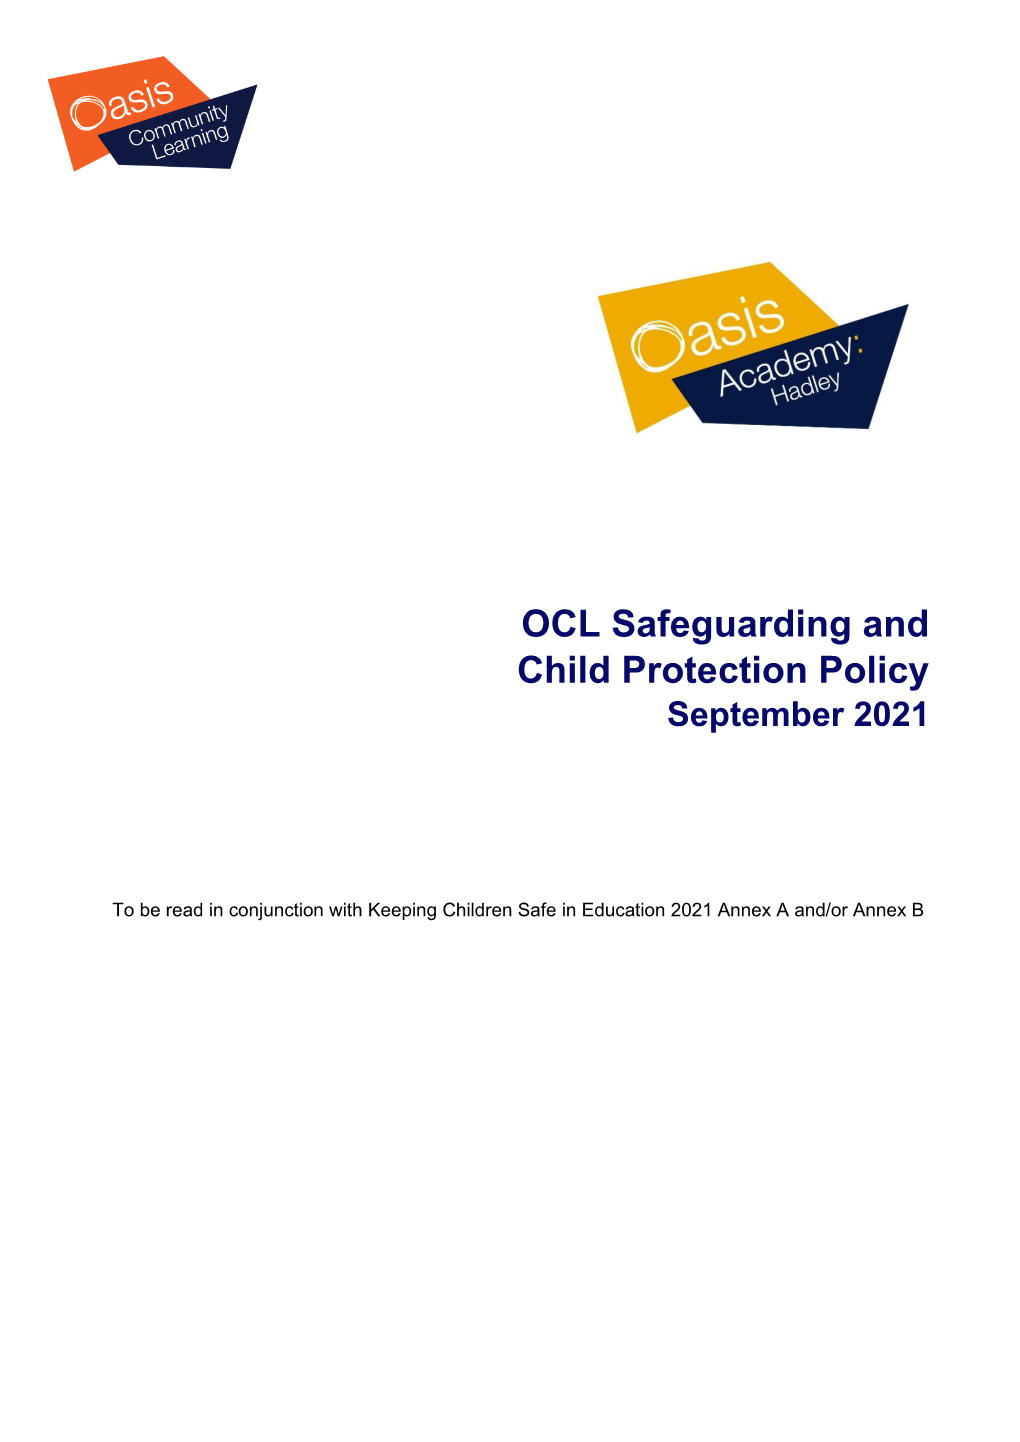 OCL Safeguarding and Child Protection Policy September 2021